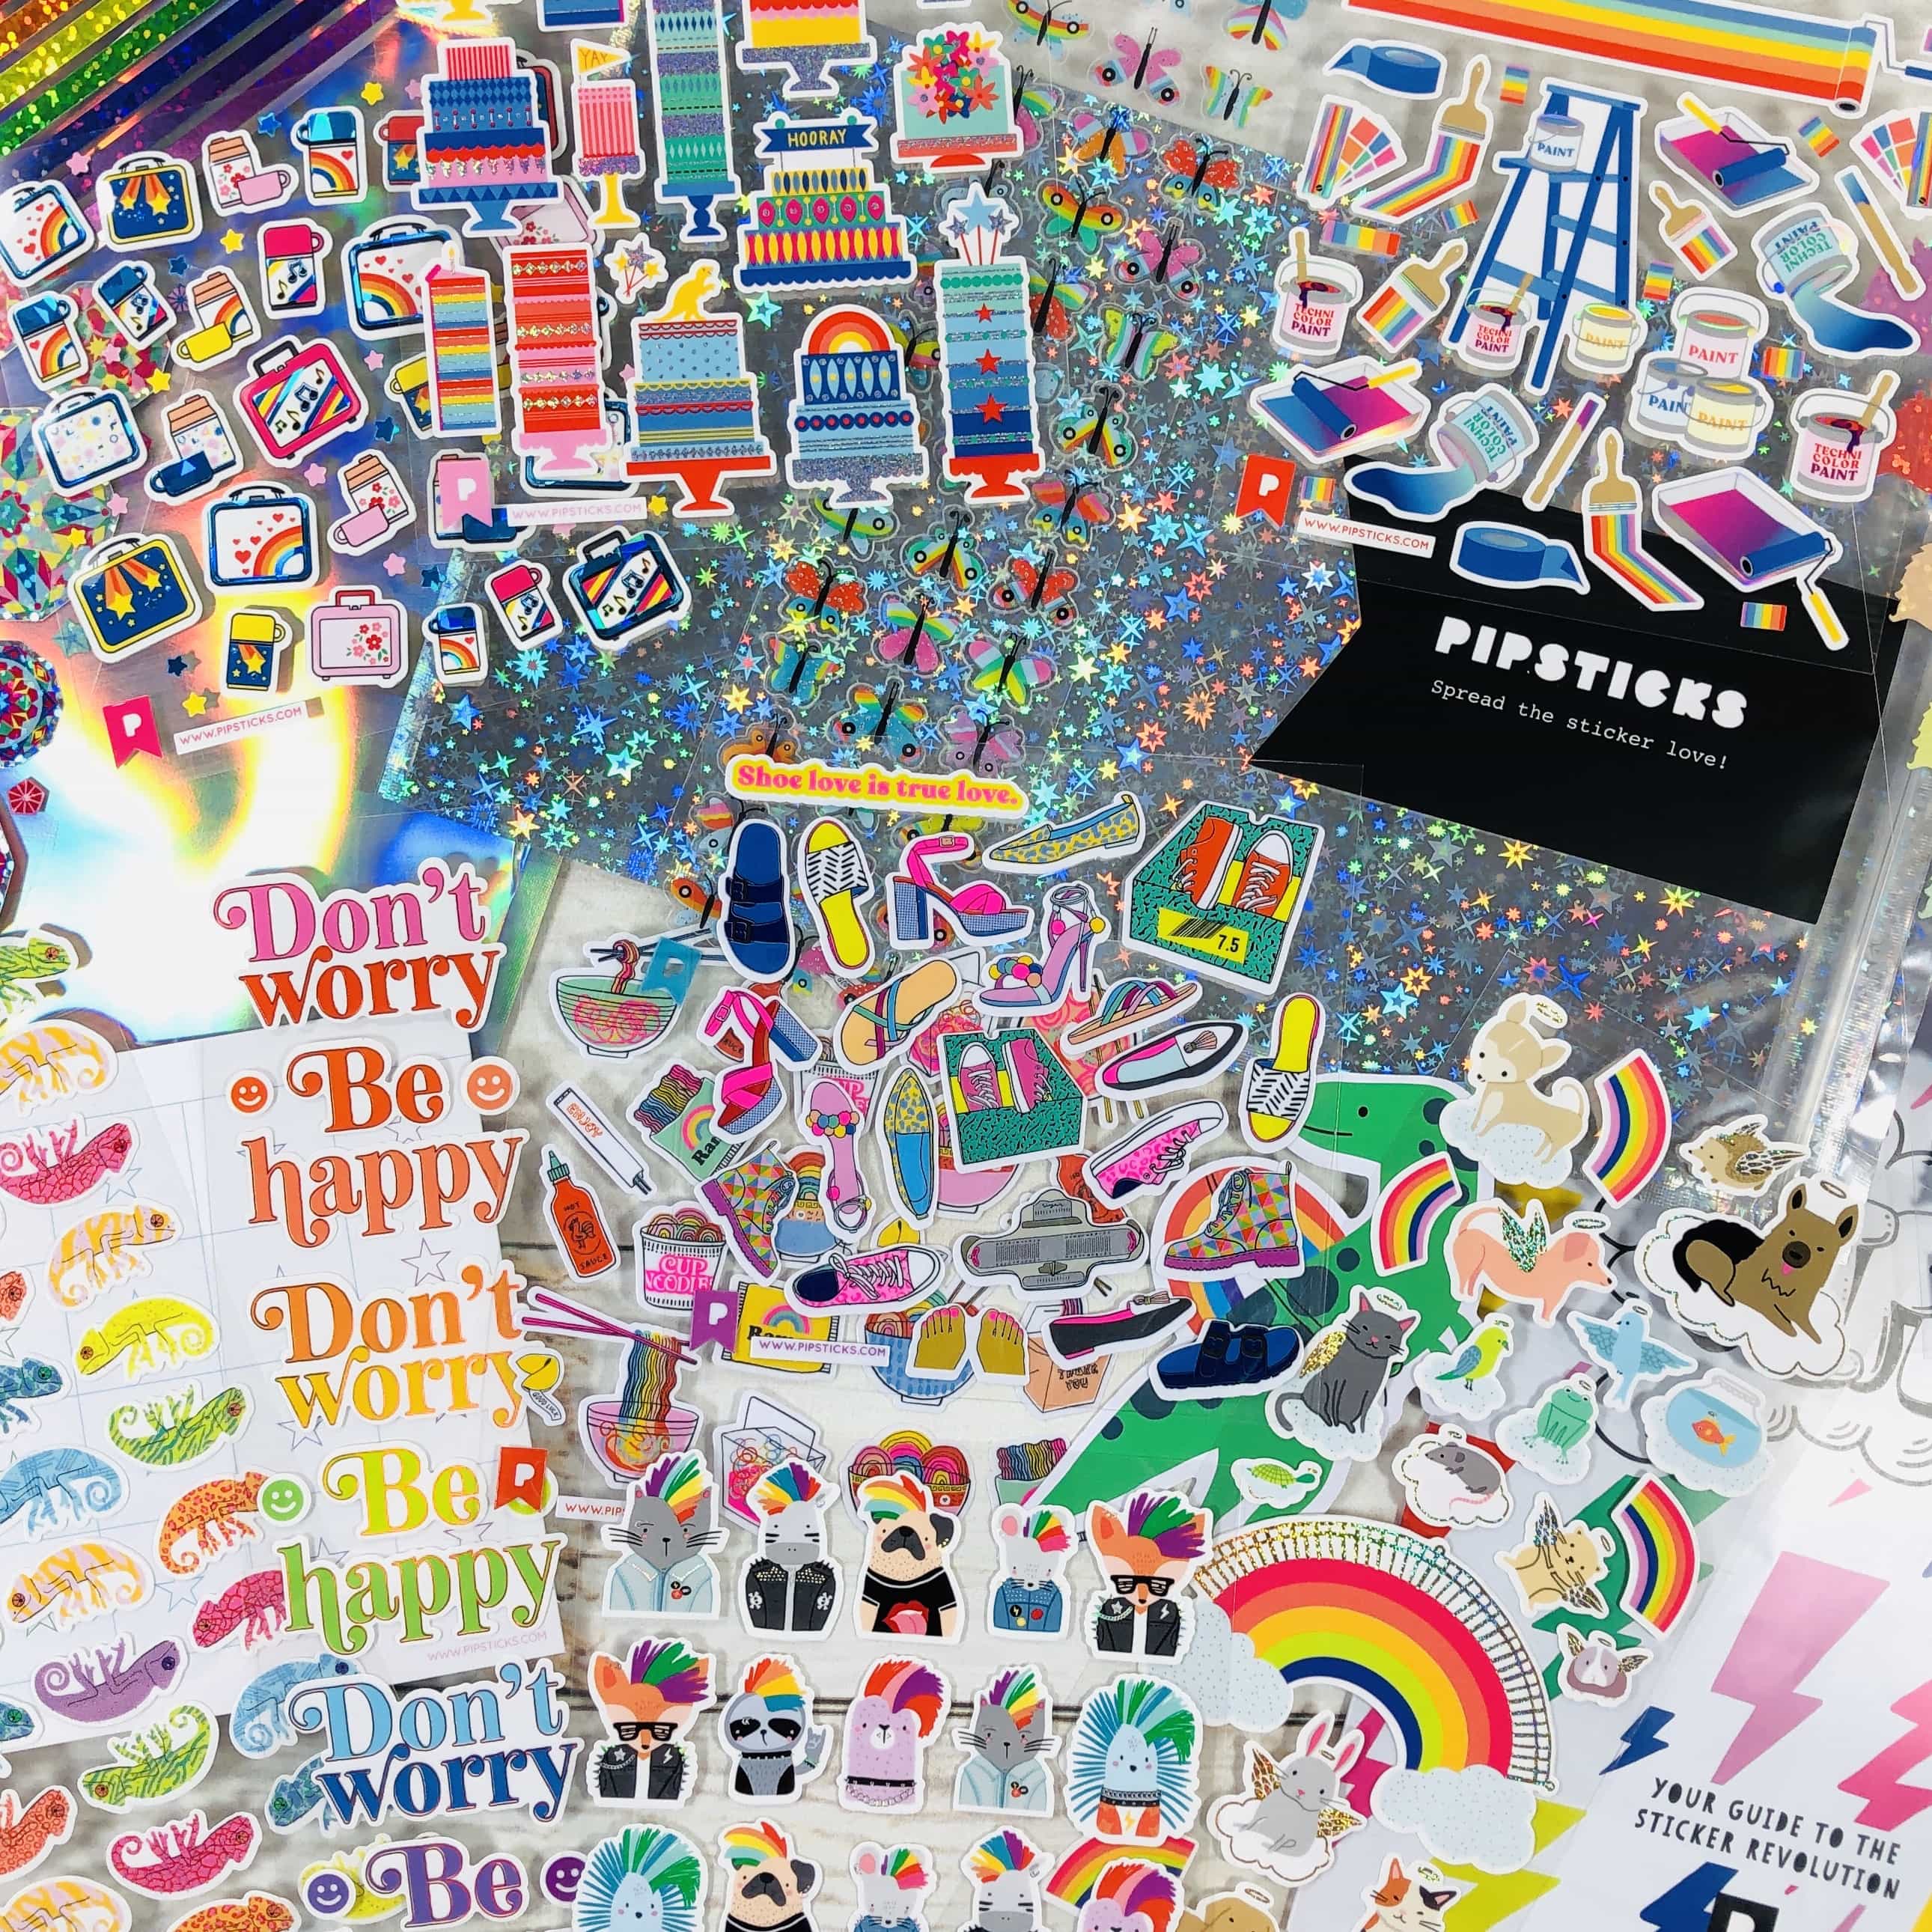 Pipsticks Pro Club Classic March 2022 Review: Adorable Stickers for Spring!  - Hello Subscription